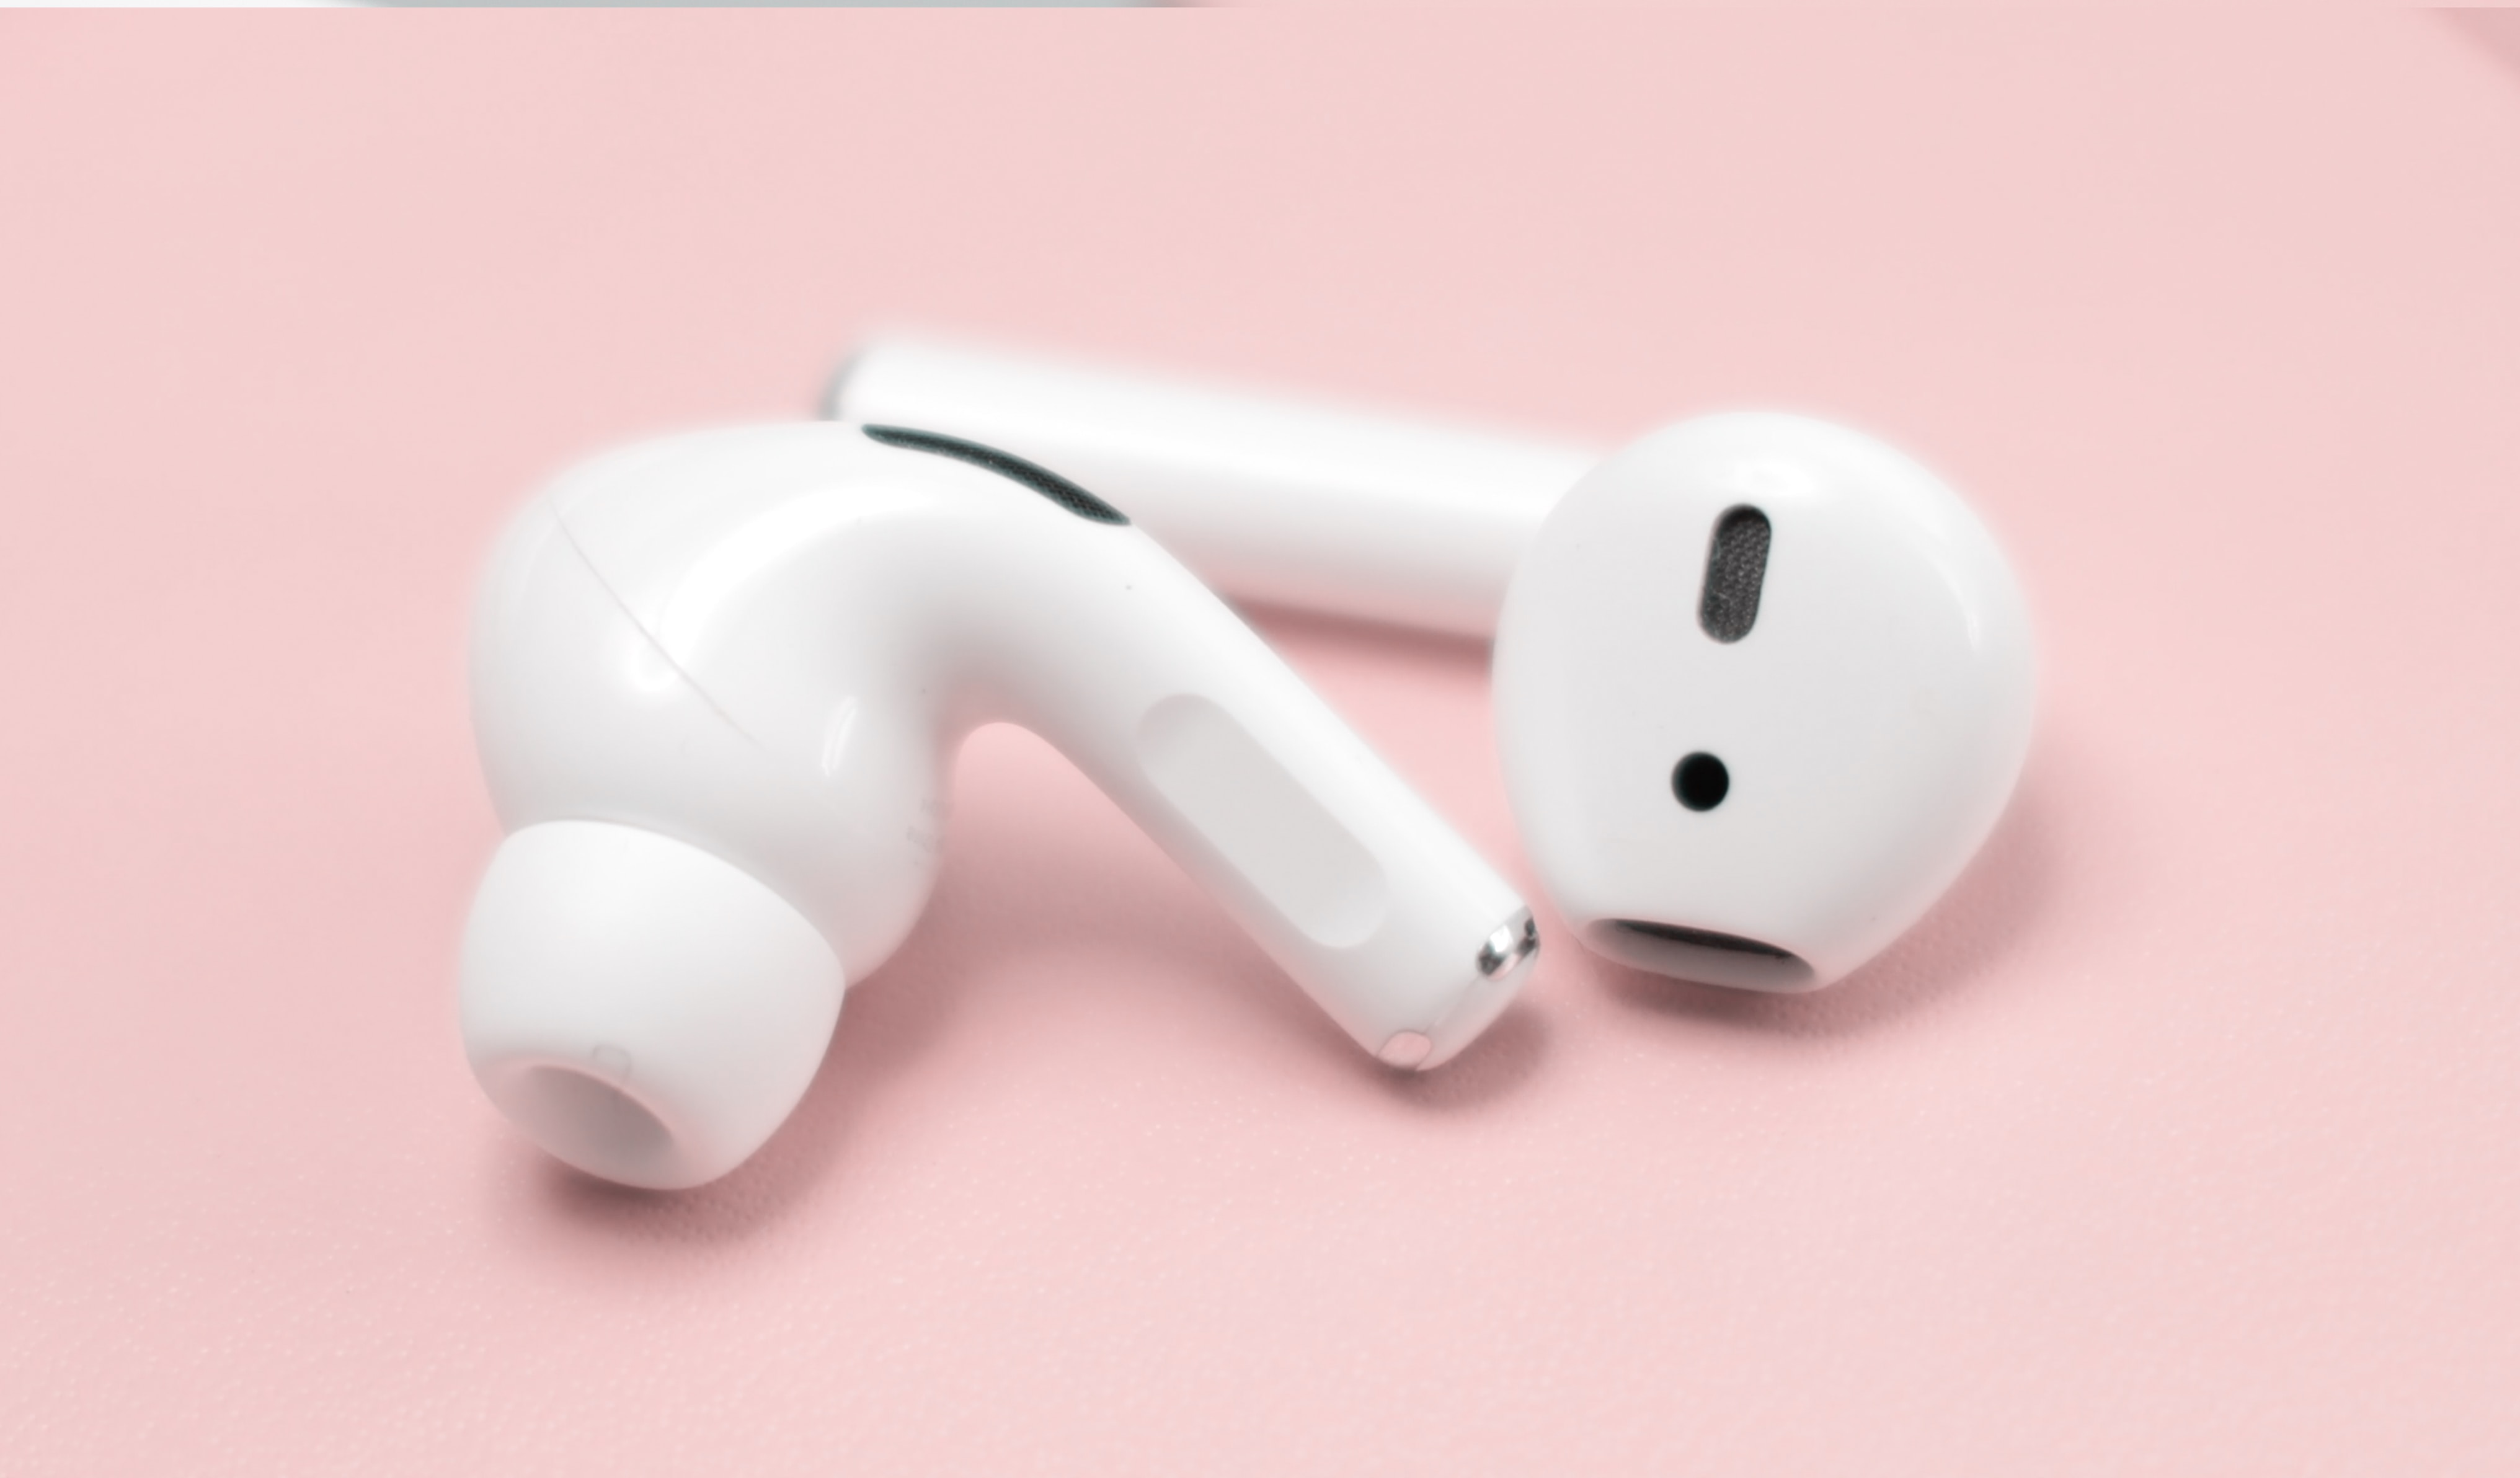 Do Apple AirPods Only Work On The IPhone?